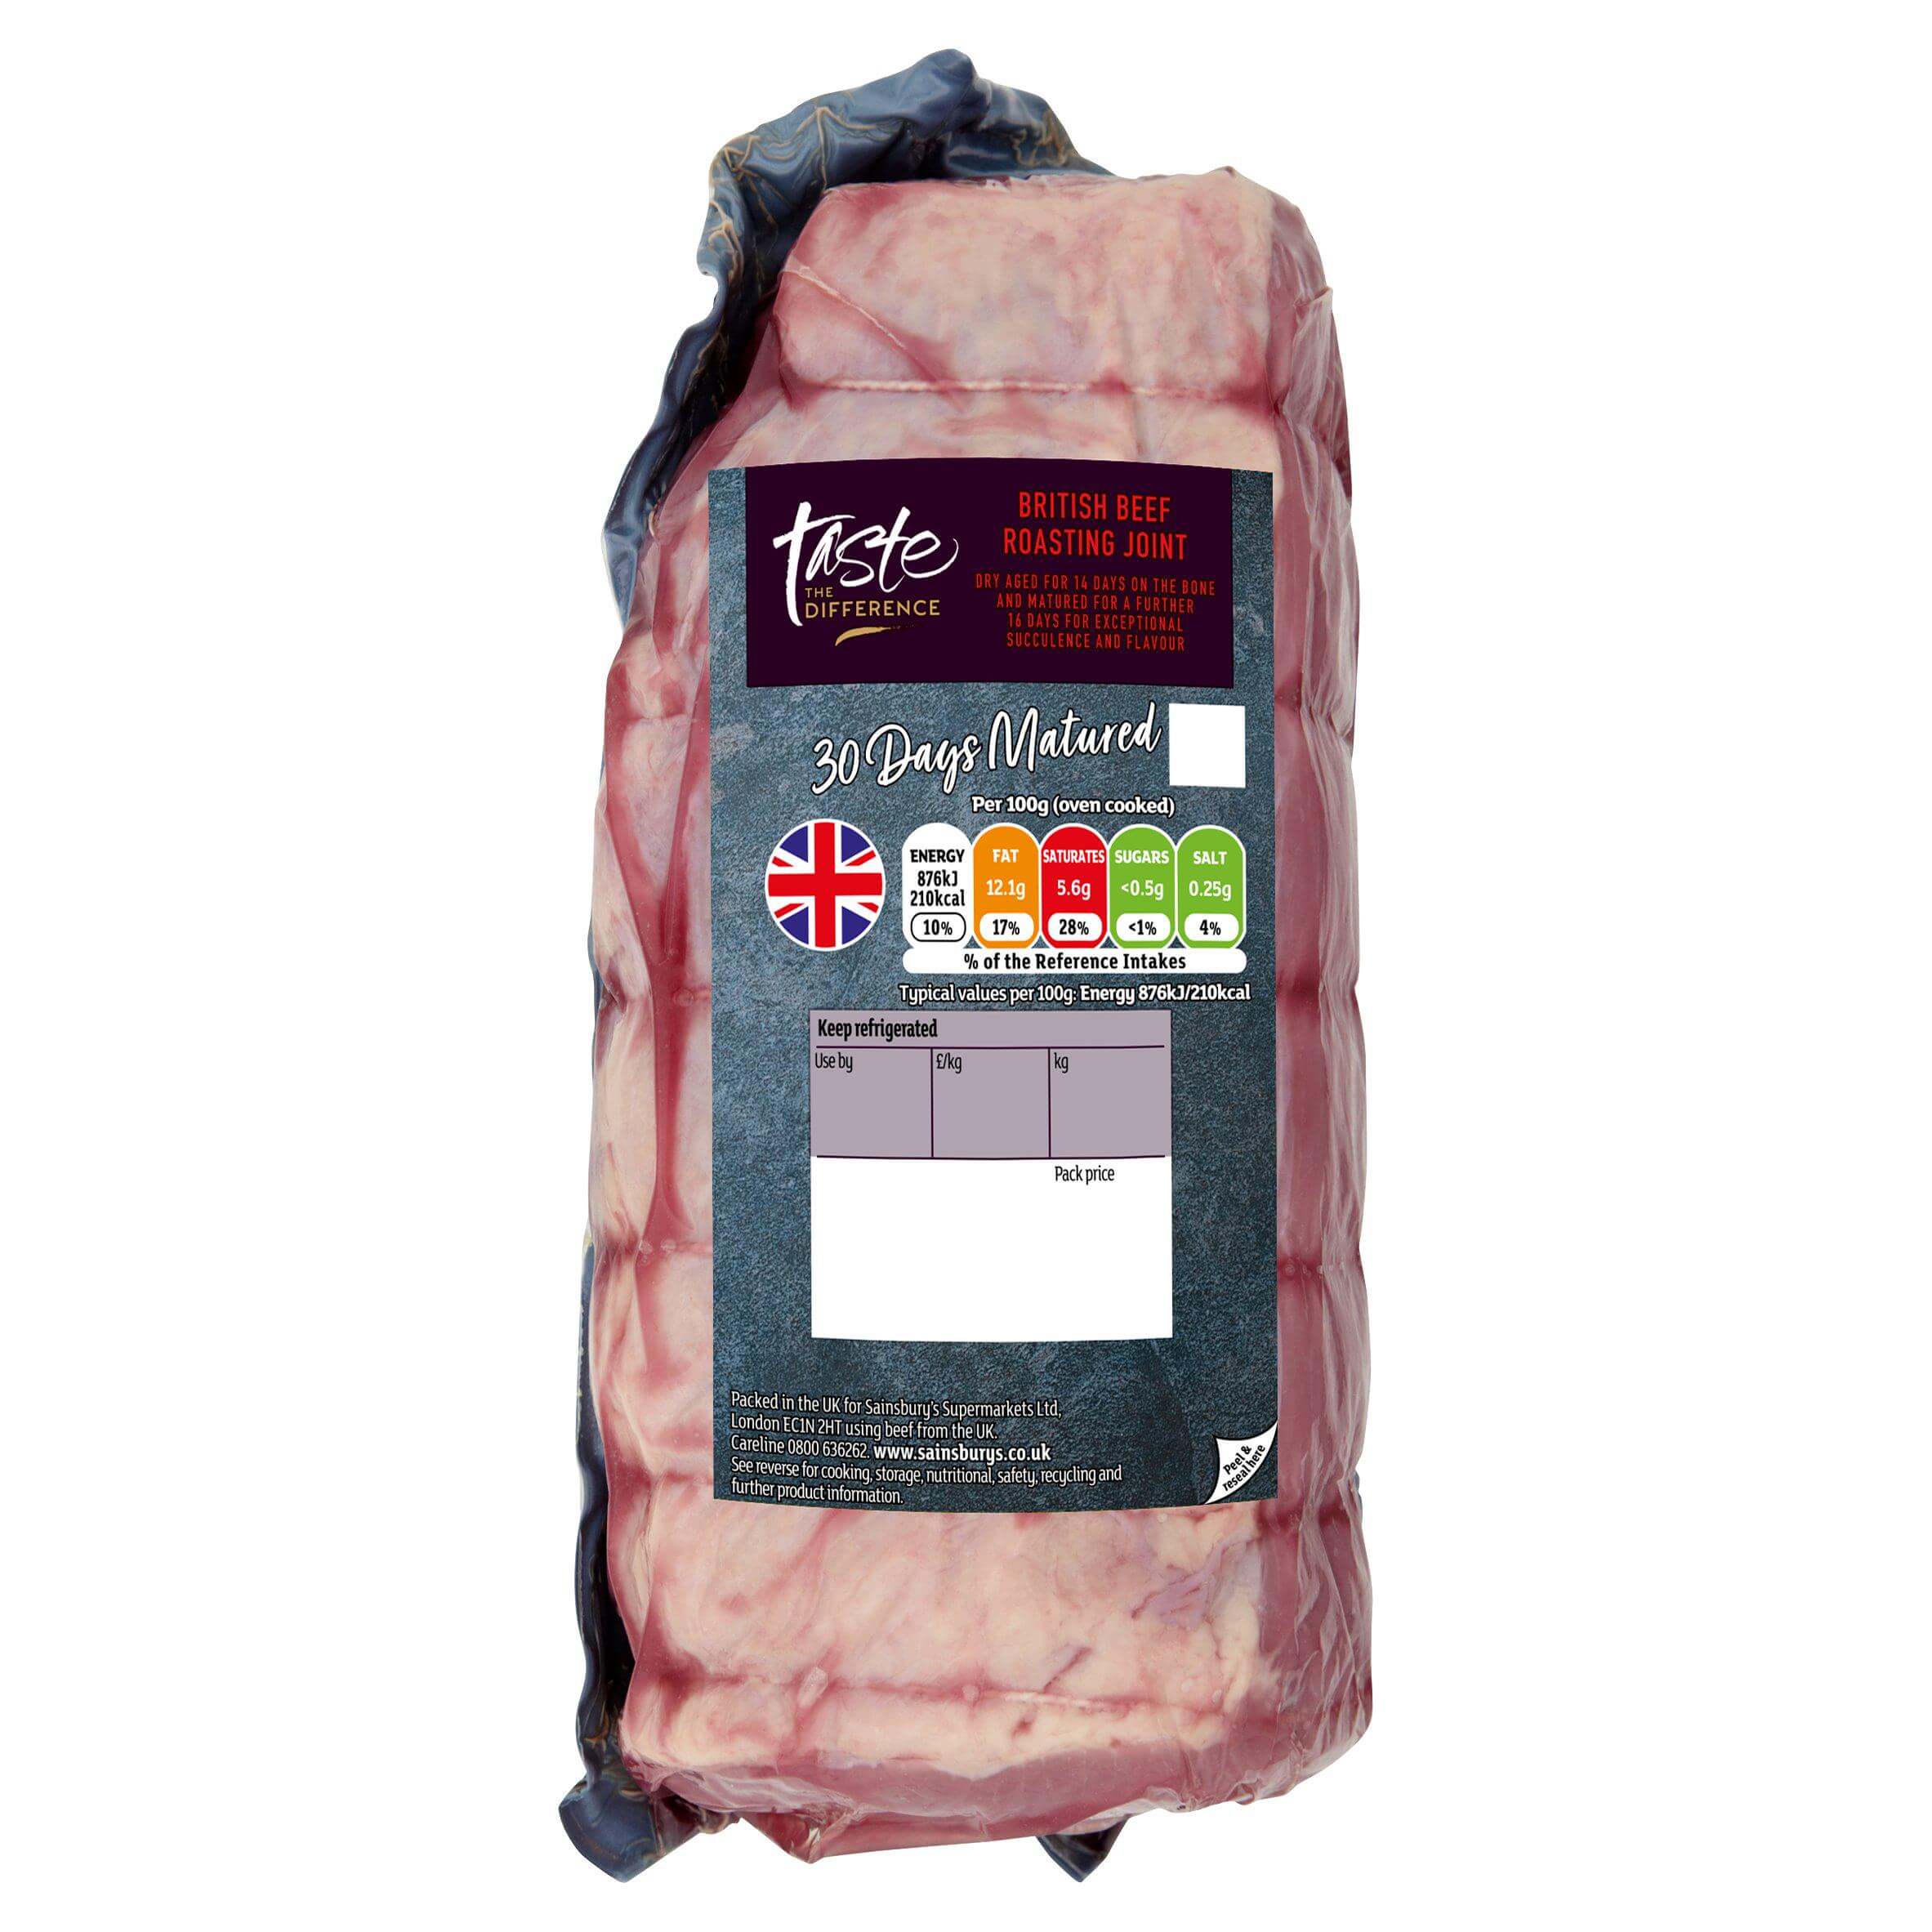 Image of 30 Days Matured British Beef Roasting Joint made in the UK by Sainsbury's. Buying this product supports a UK business, jobs and the local community